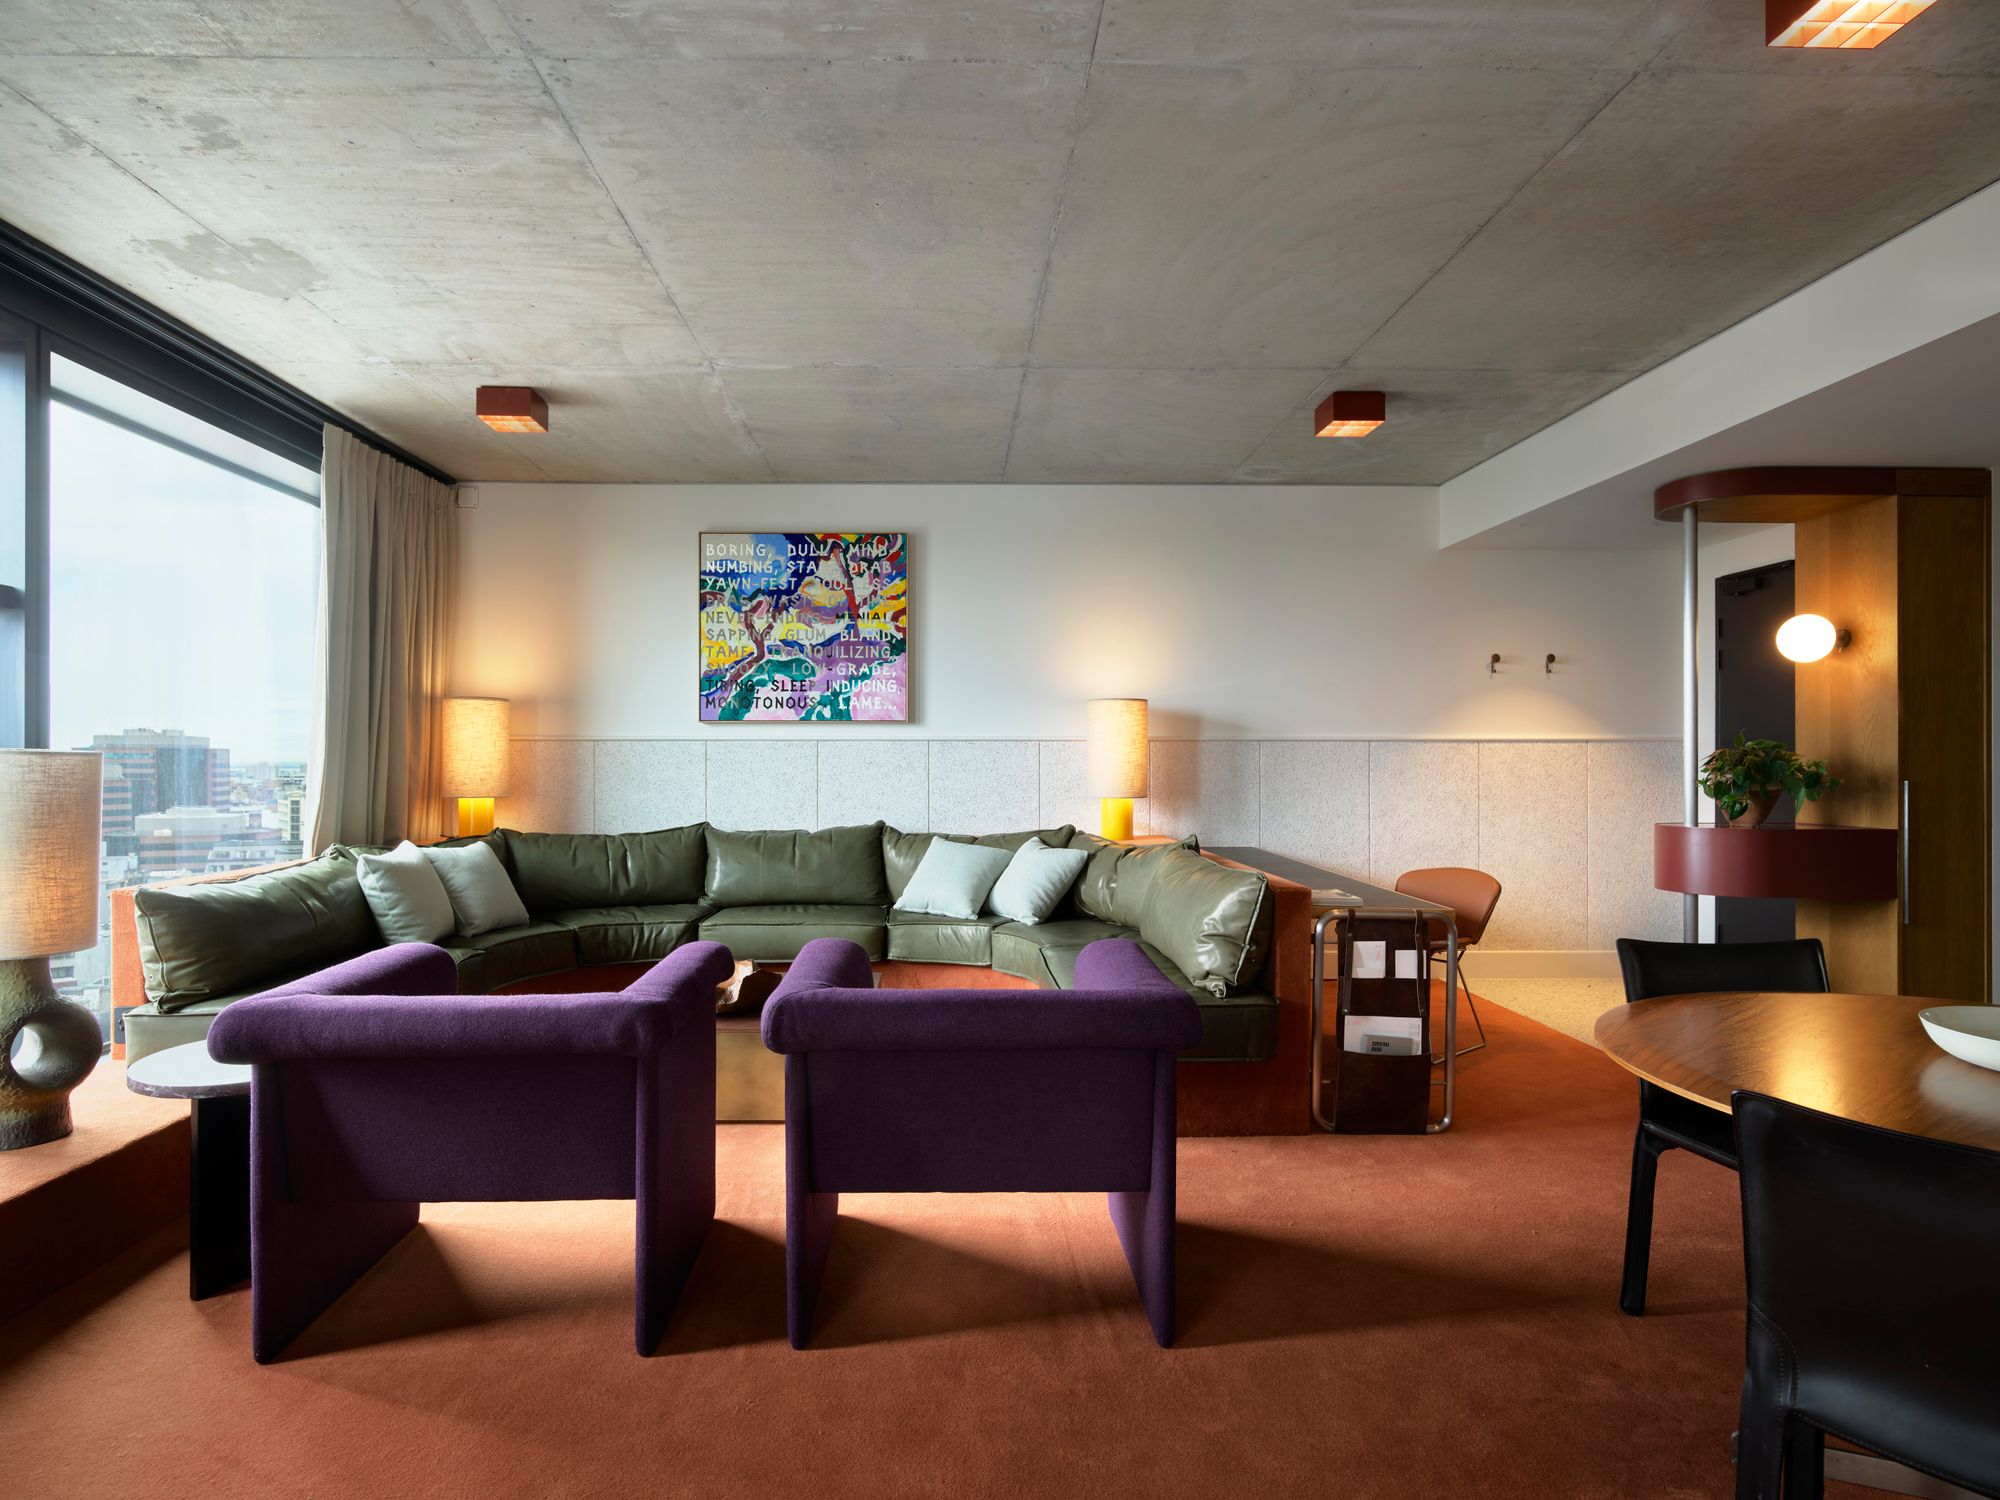 Ace Hotel Sydney. Suite room option for guests with large living, dinning and kitchen space. 